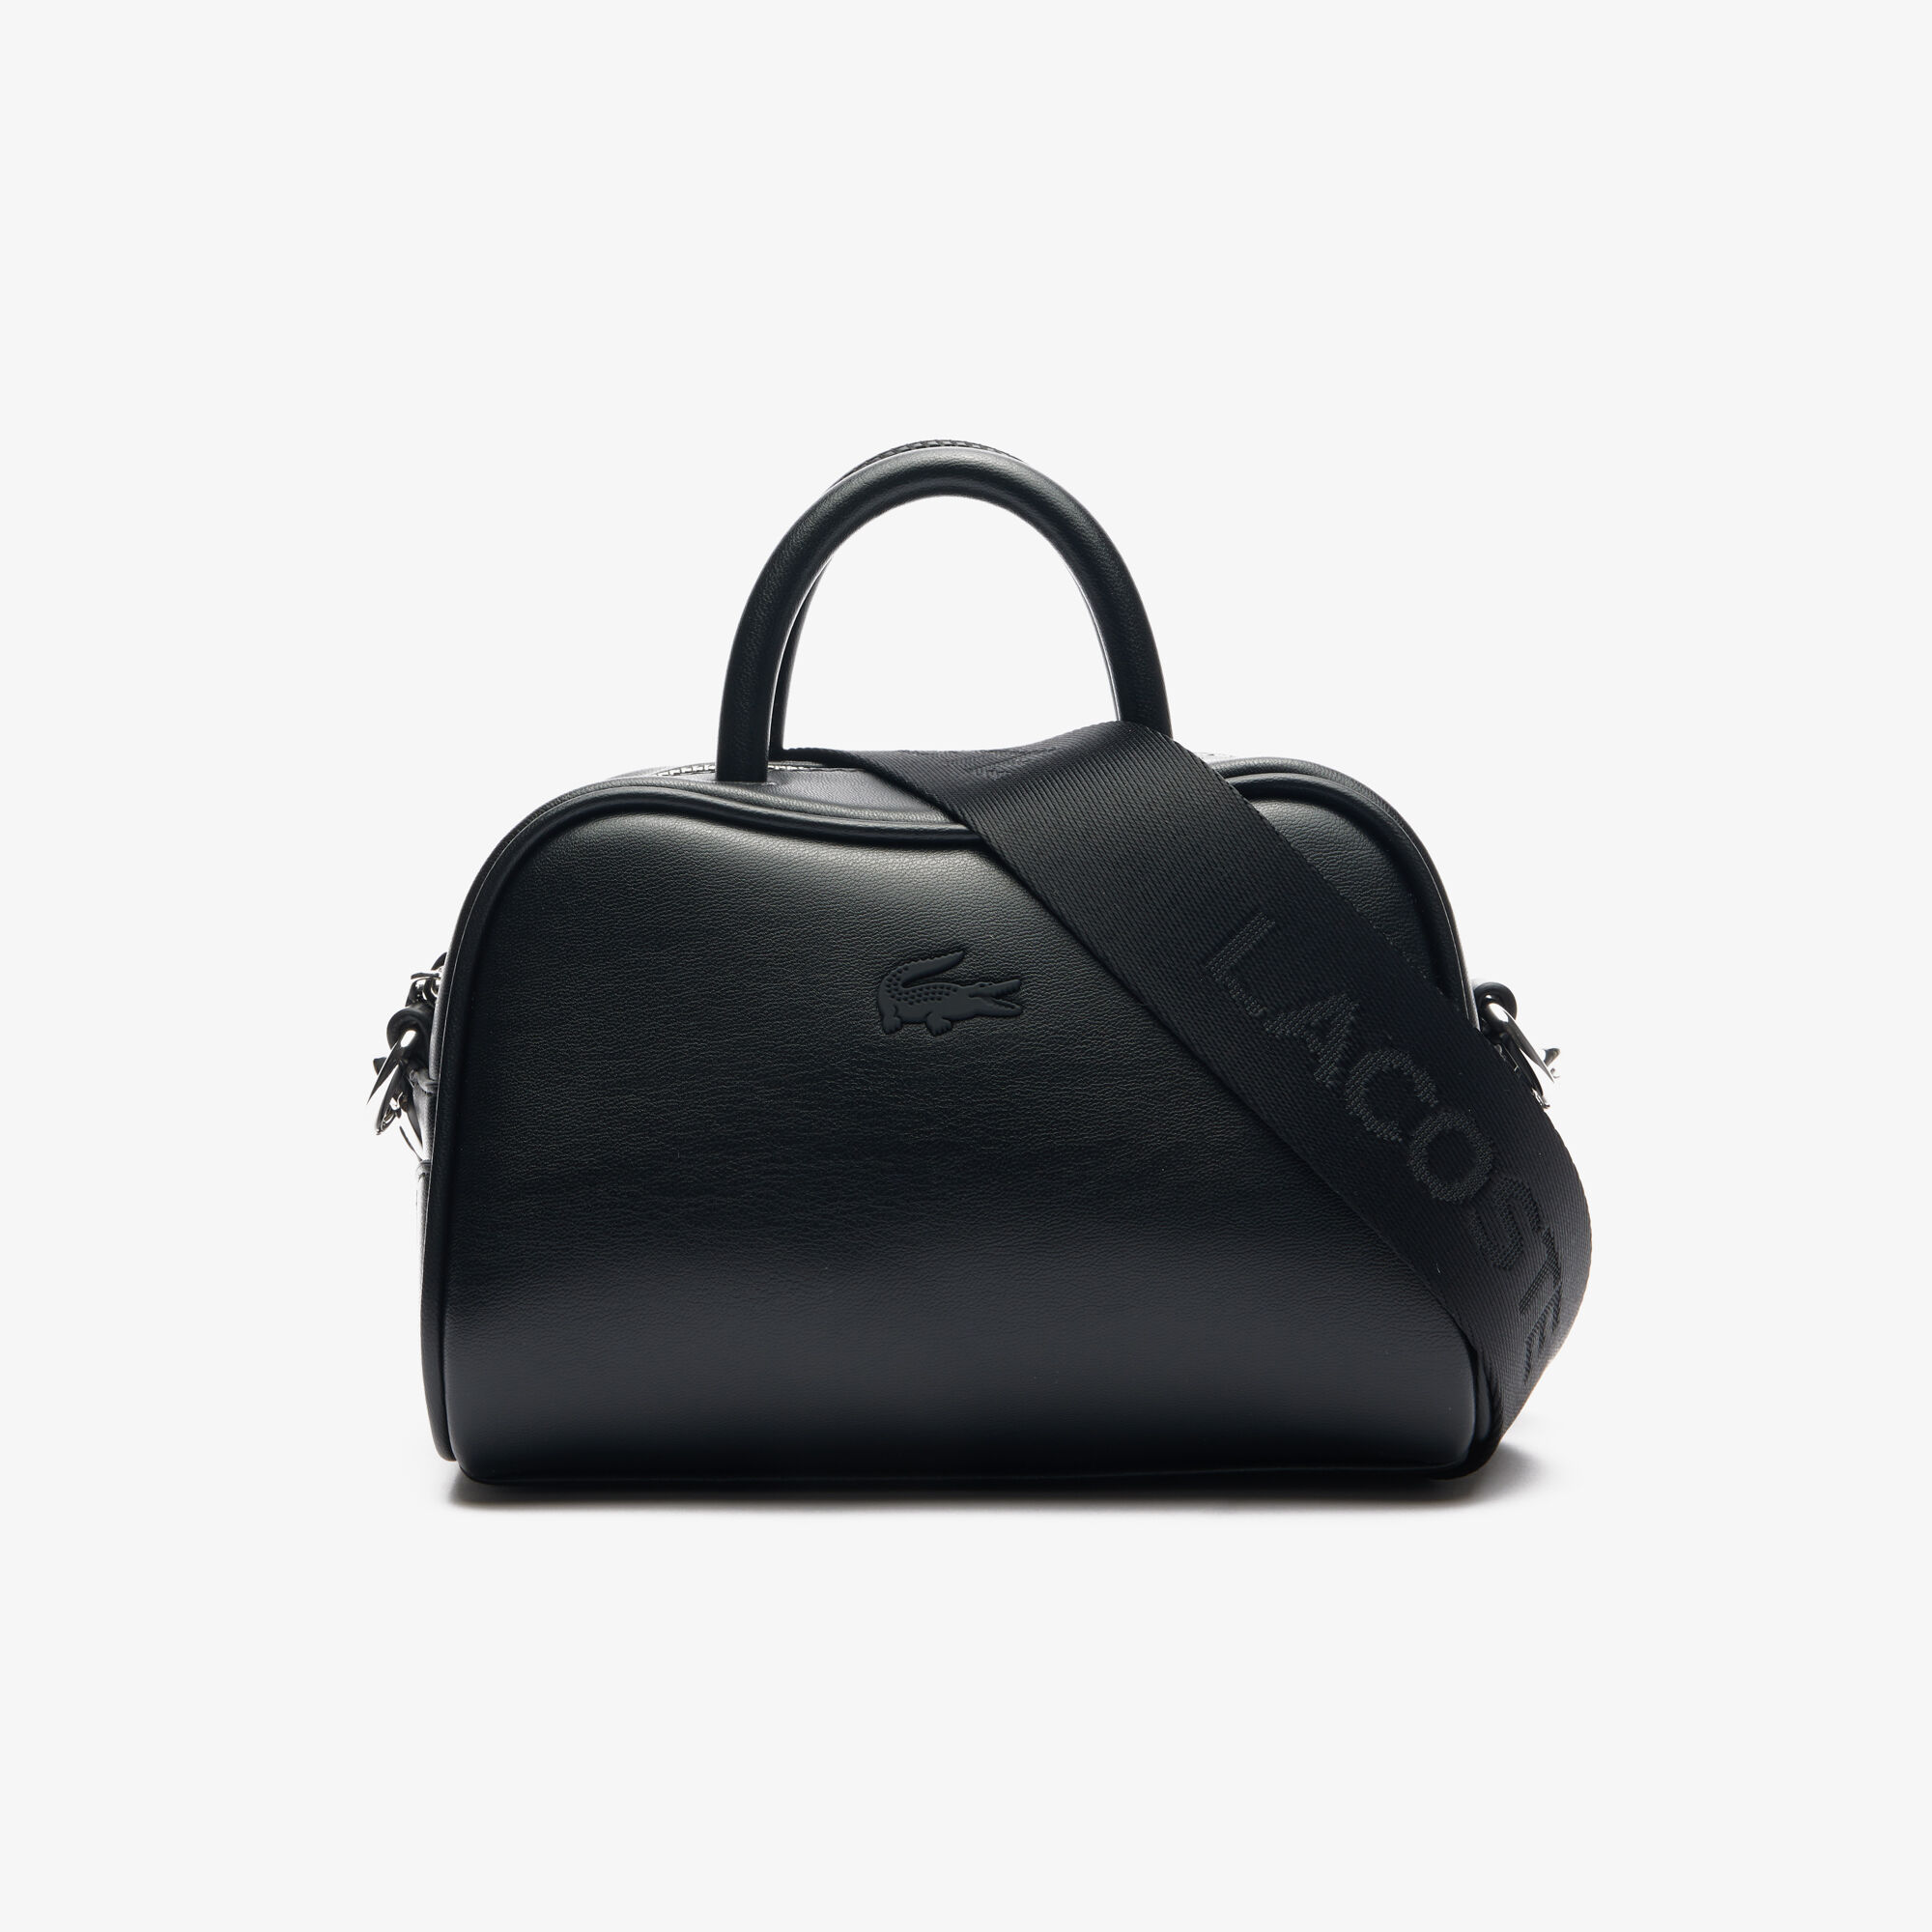 Lacoste Crossover Bag Black - Mens - Small Bags Lacoste